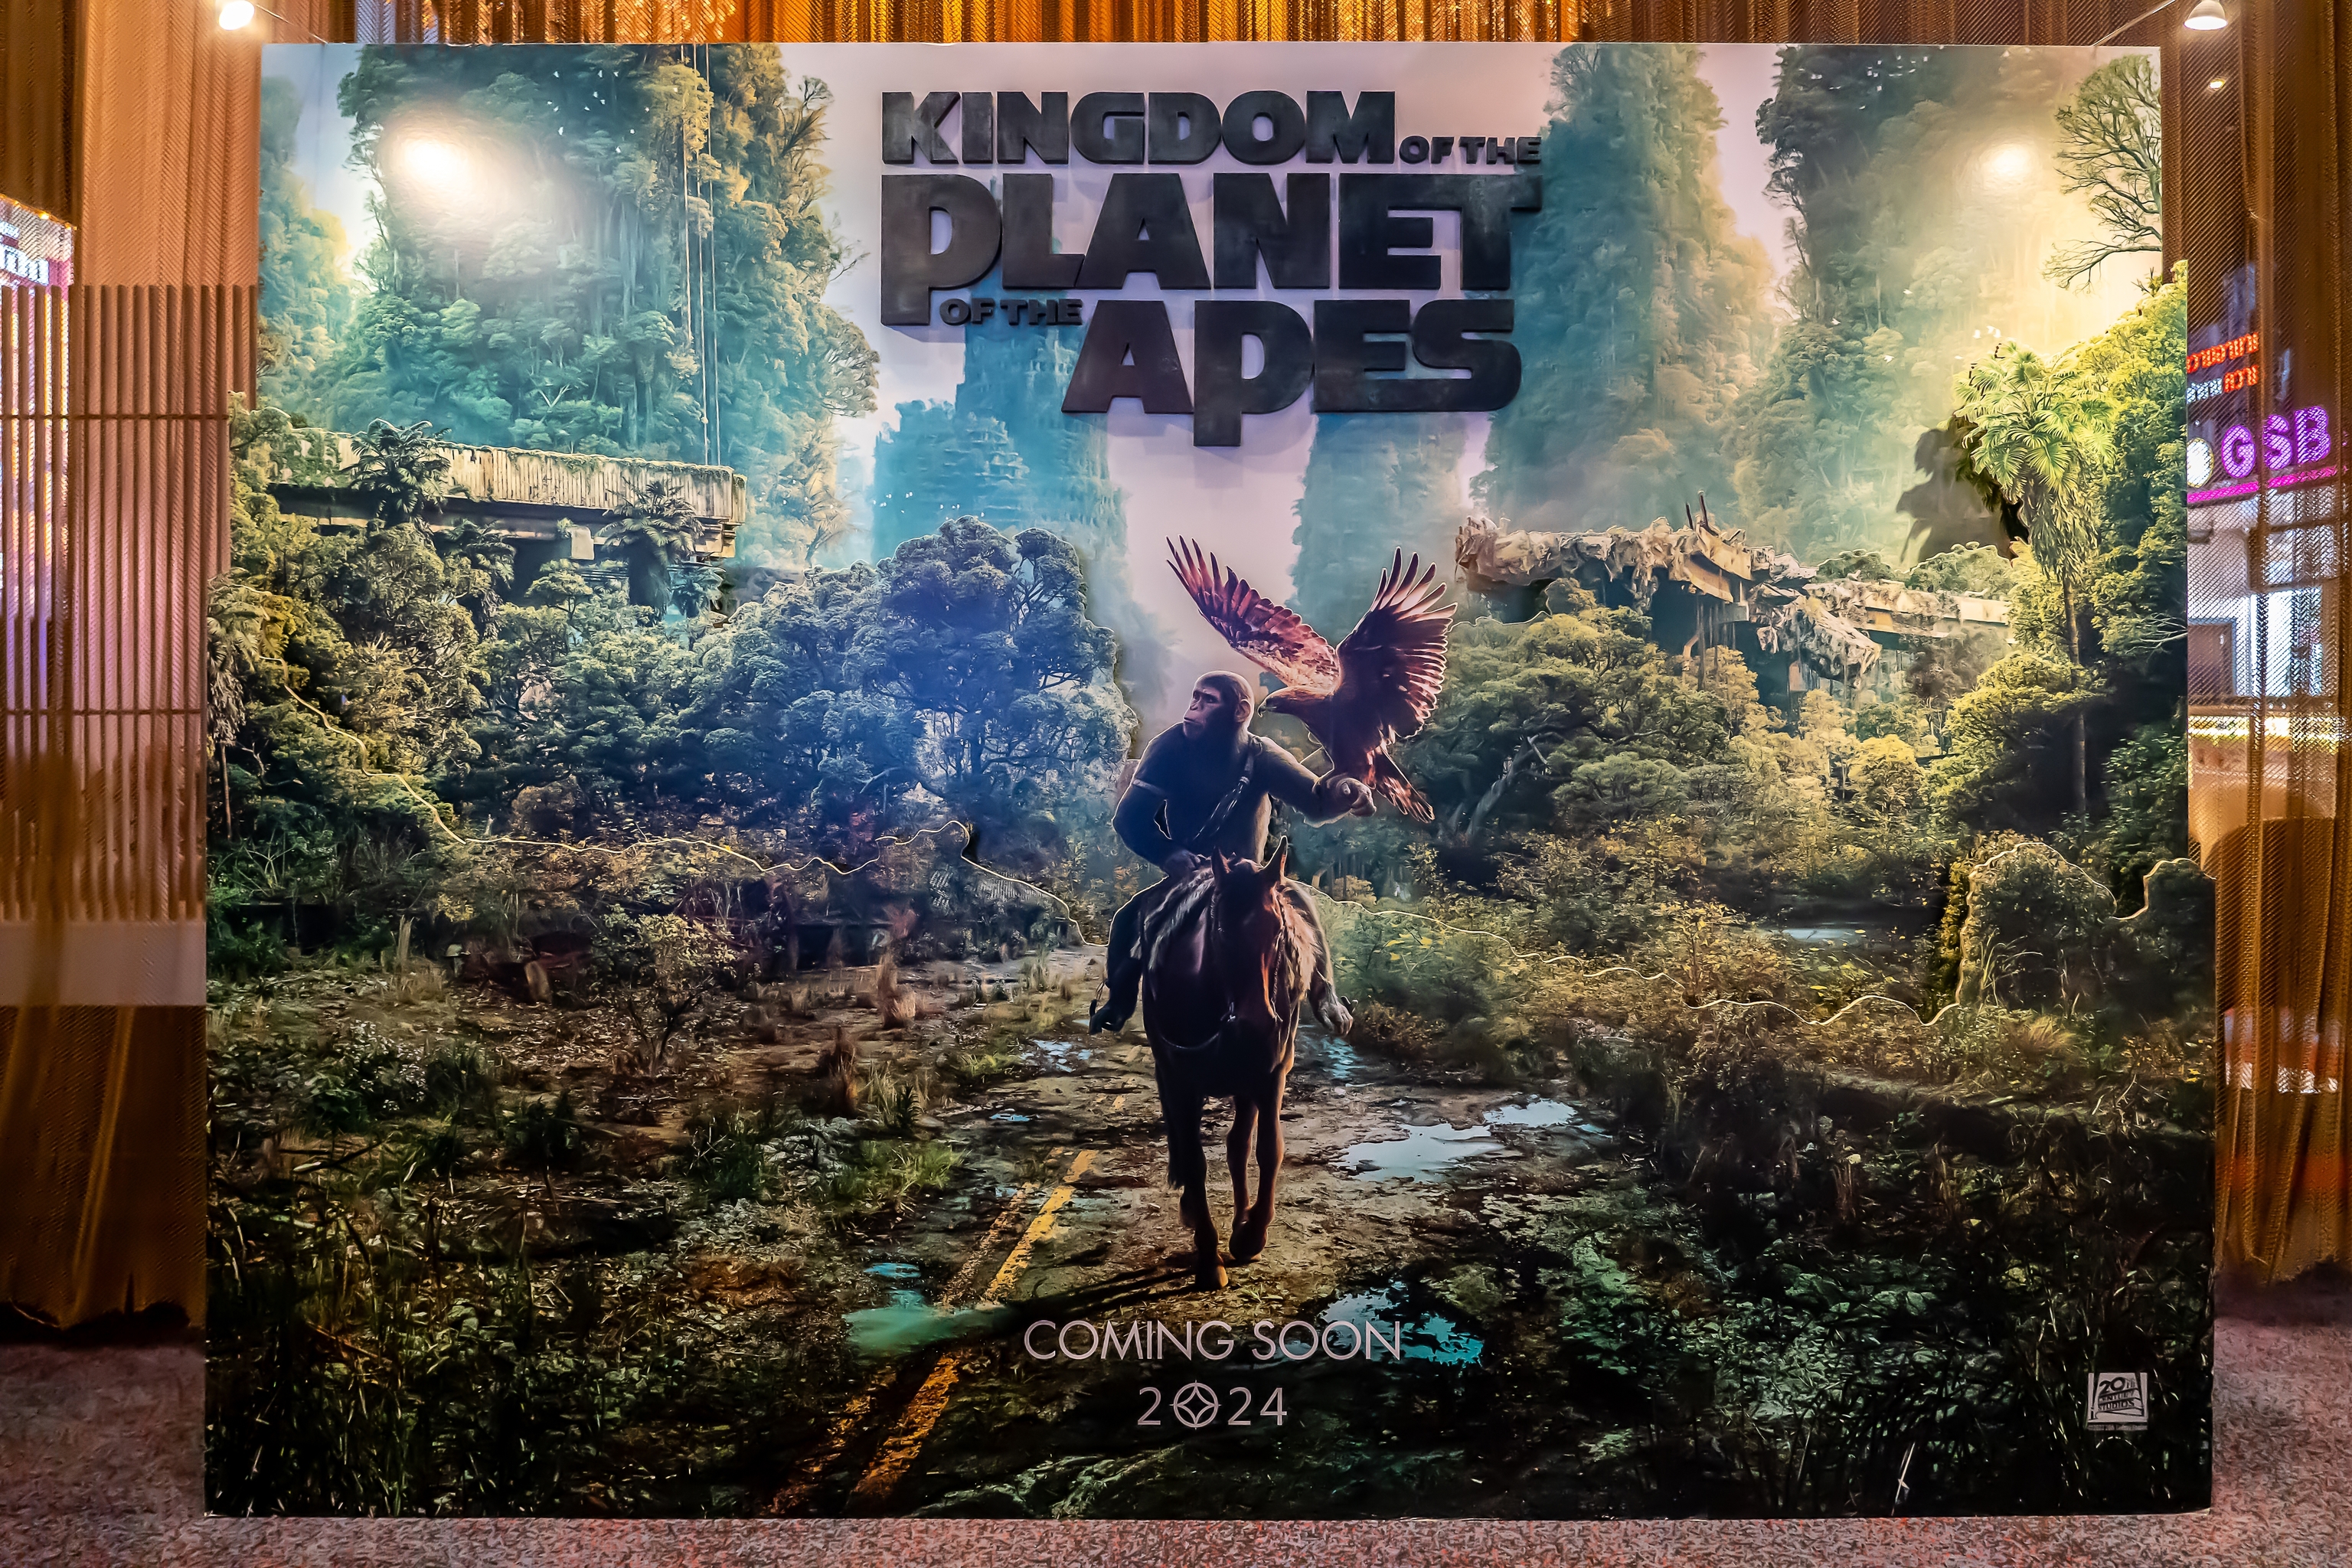 Poster from the movie 'Kingdom of the Planet of the Apes'